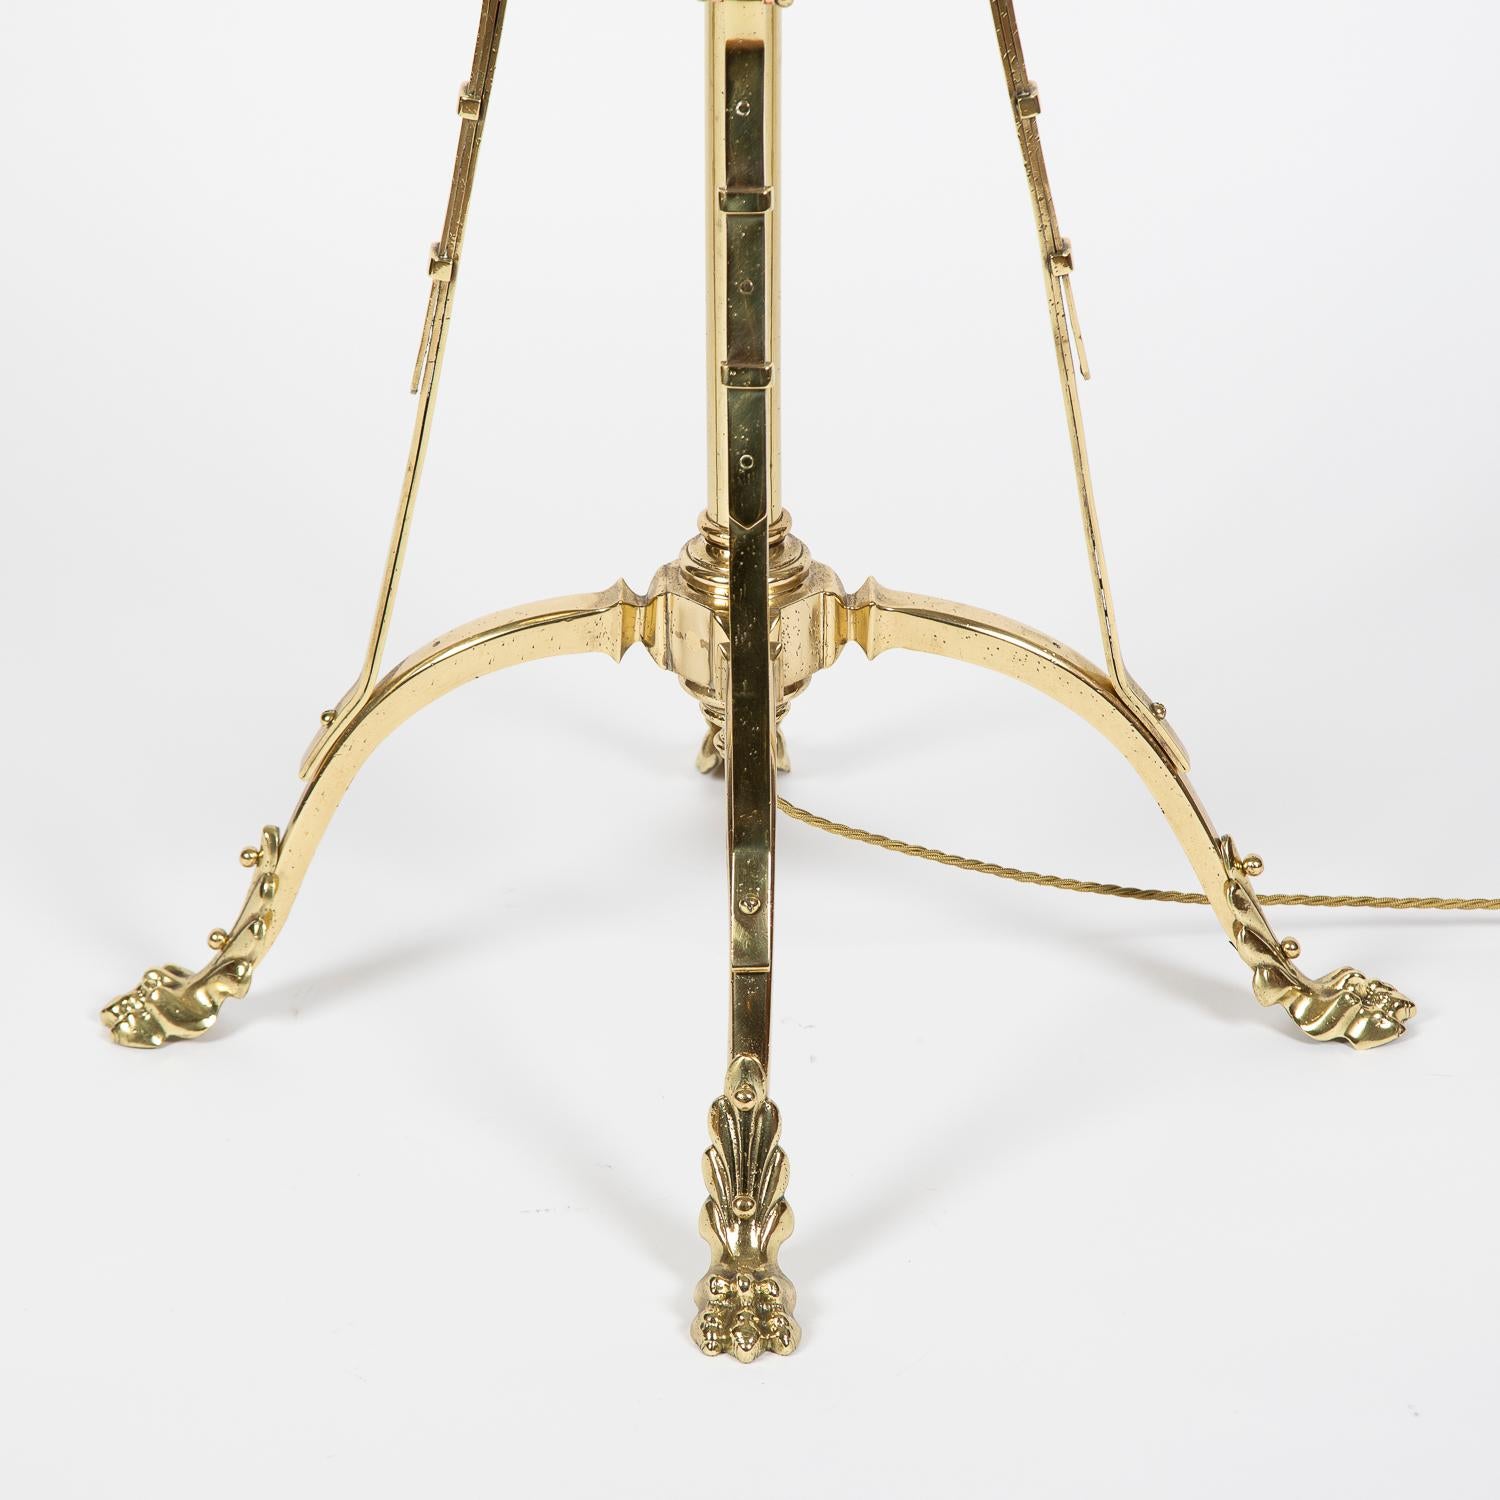 19th Century Floor Lamp with Belt and Buckle Brass Work For Sale